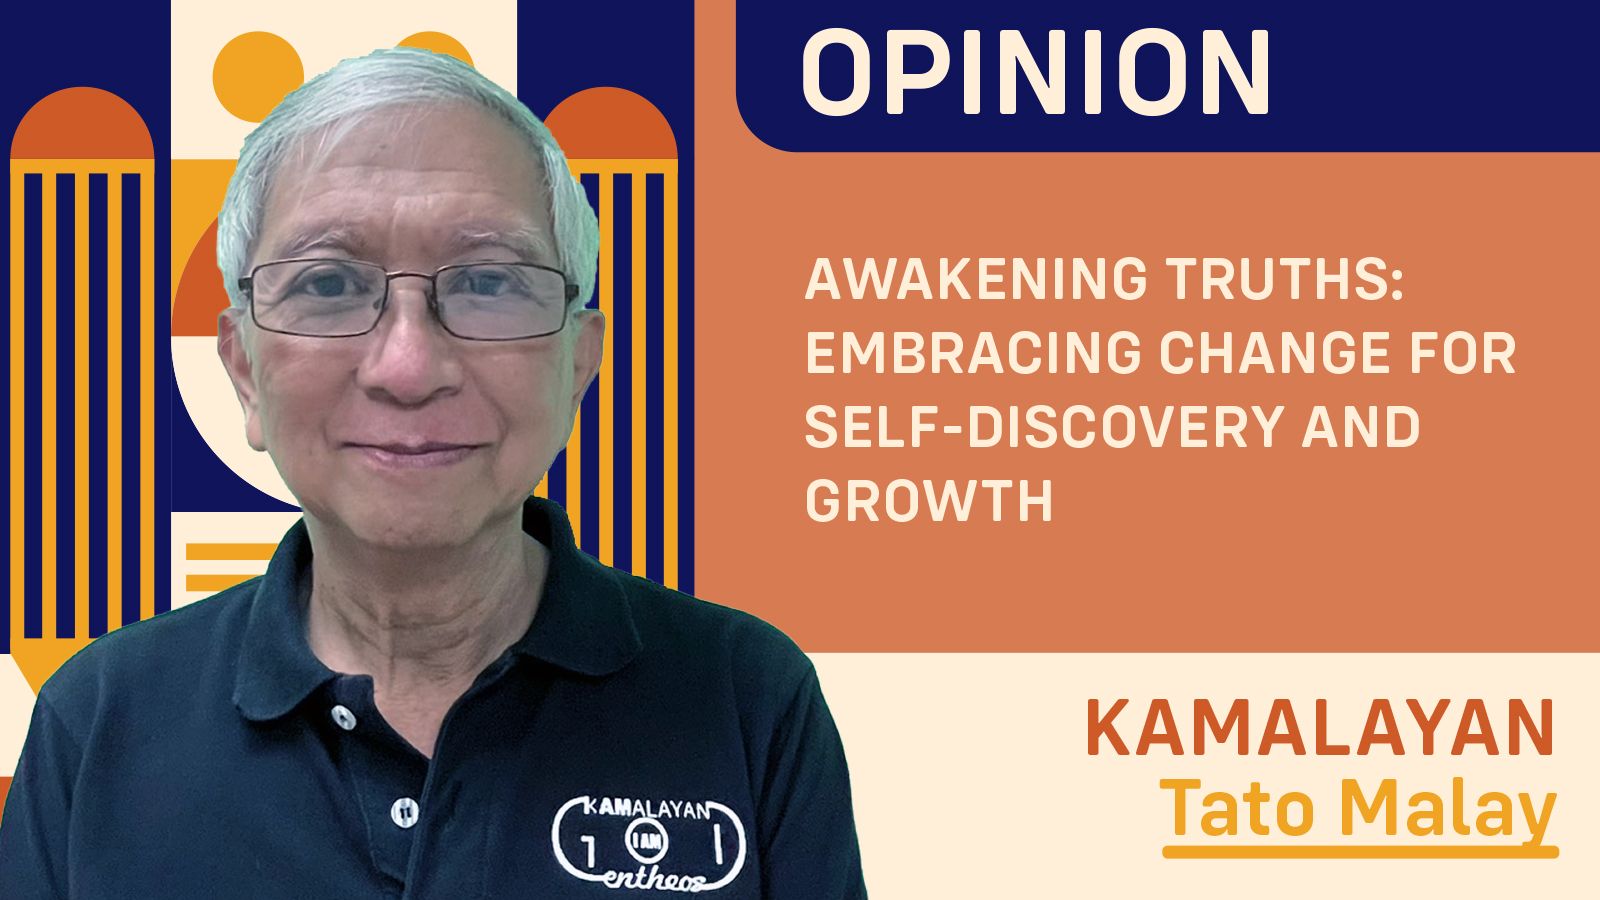 AWAKENING TRUTHS: EMBRACING CHANGE FOR SELF-DISCOVERY AND GROWTH 